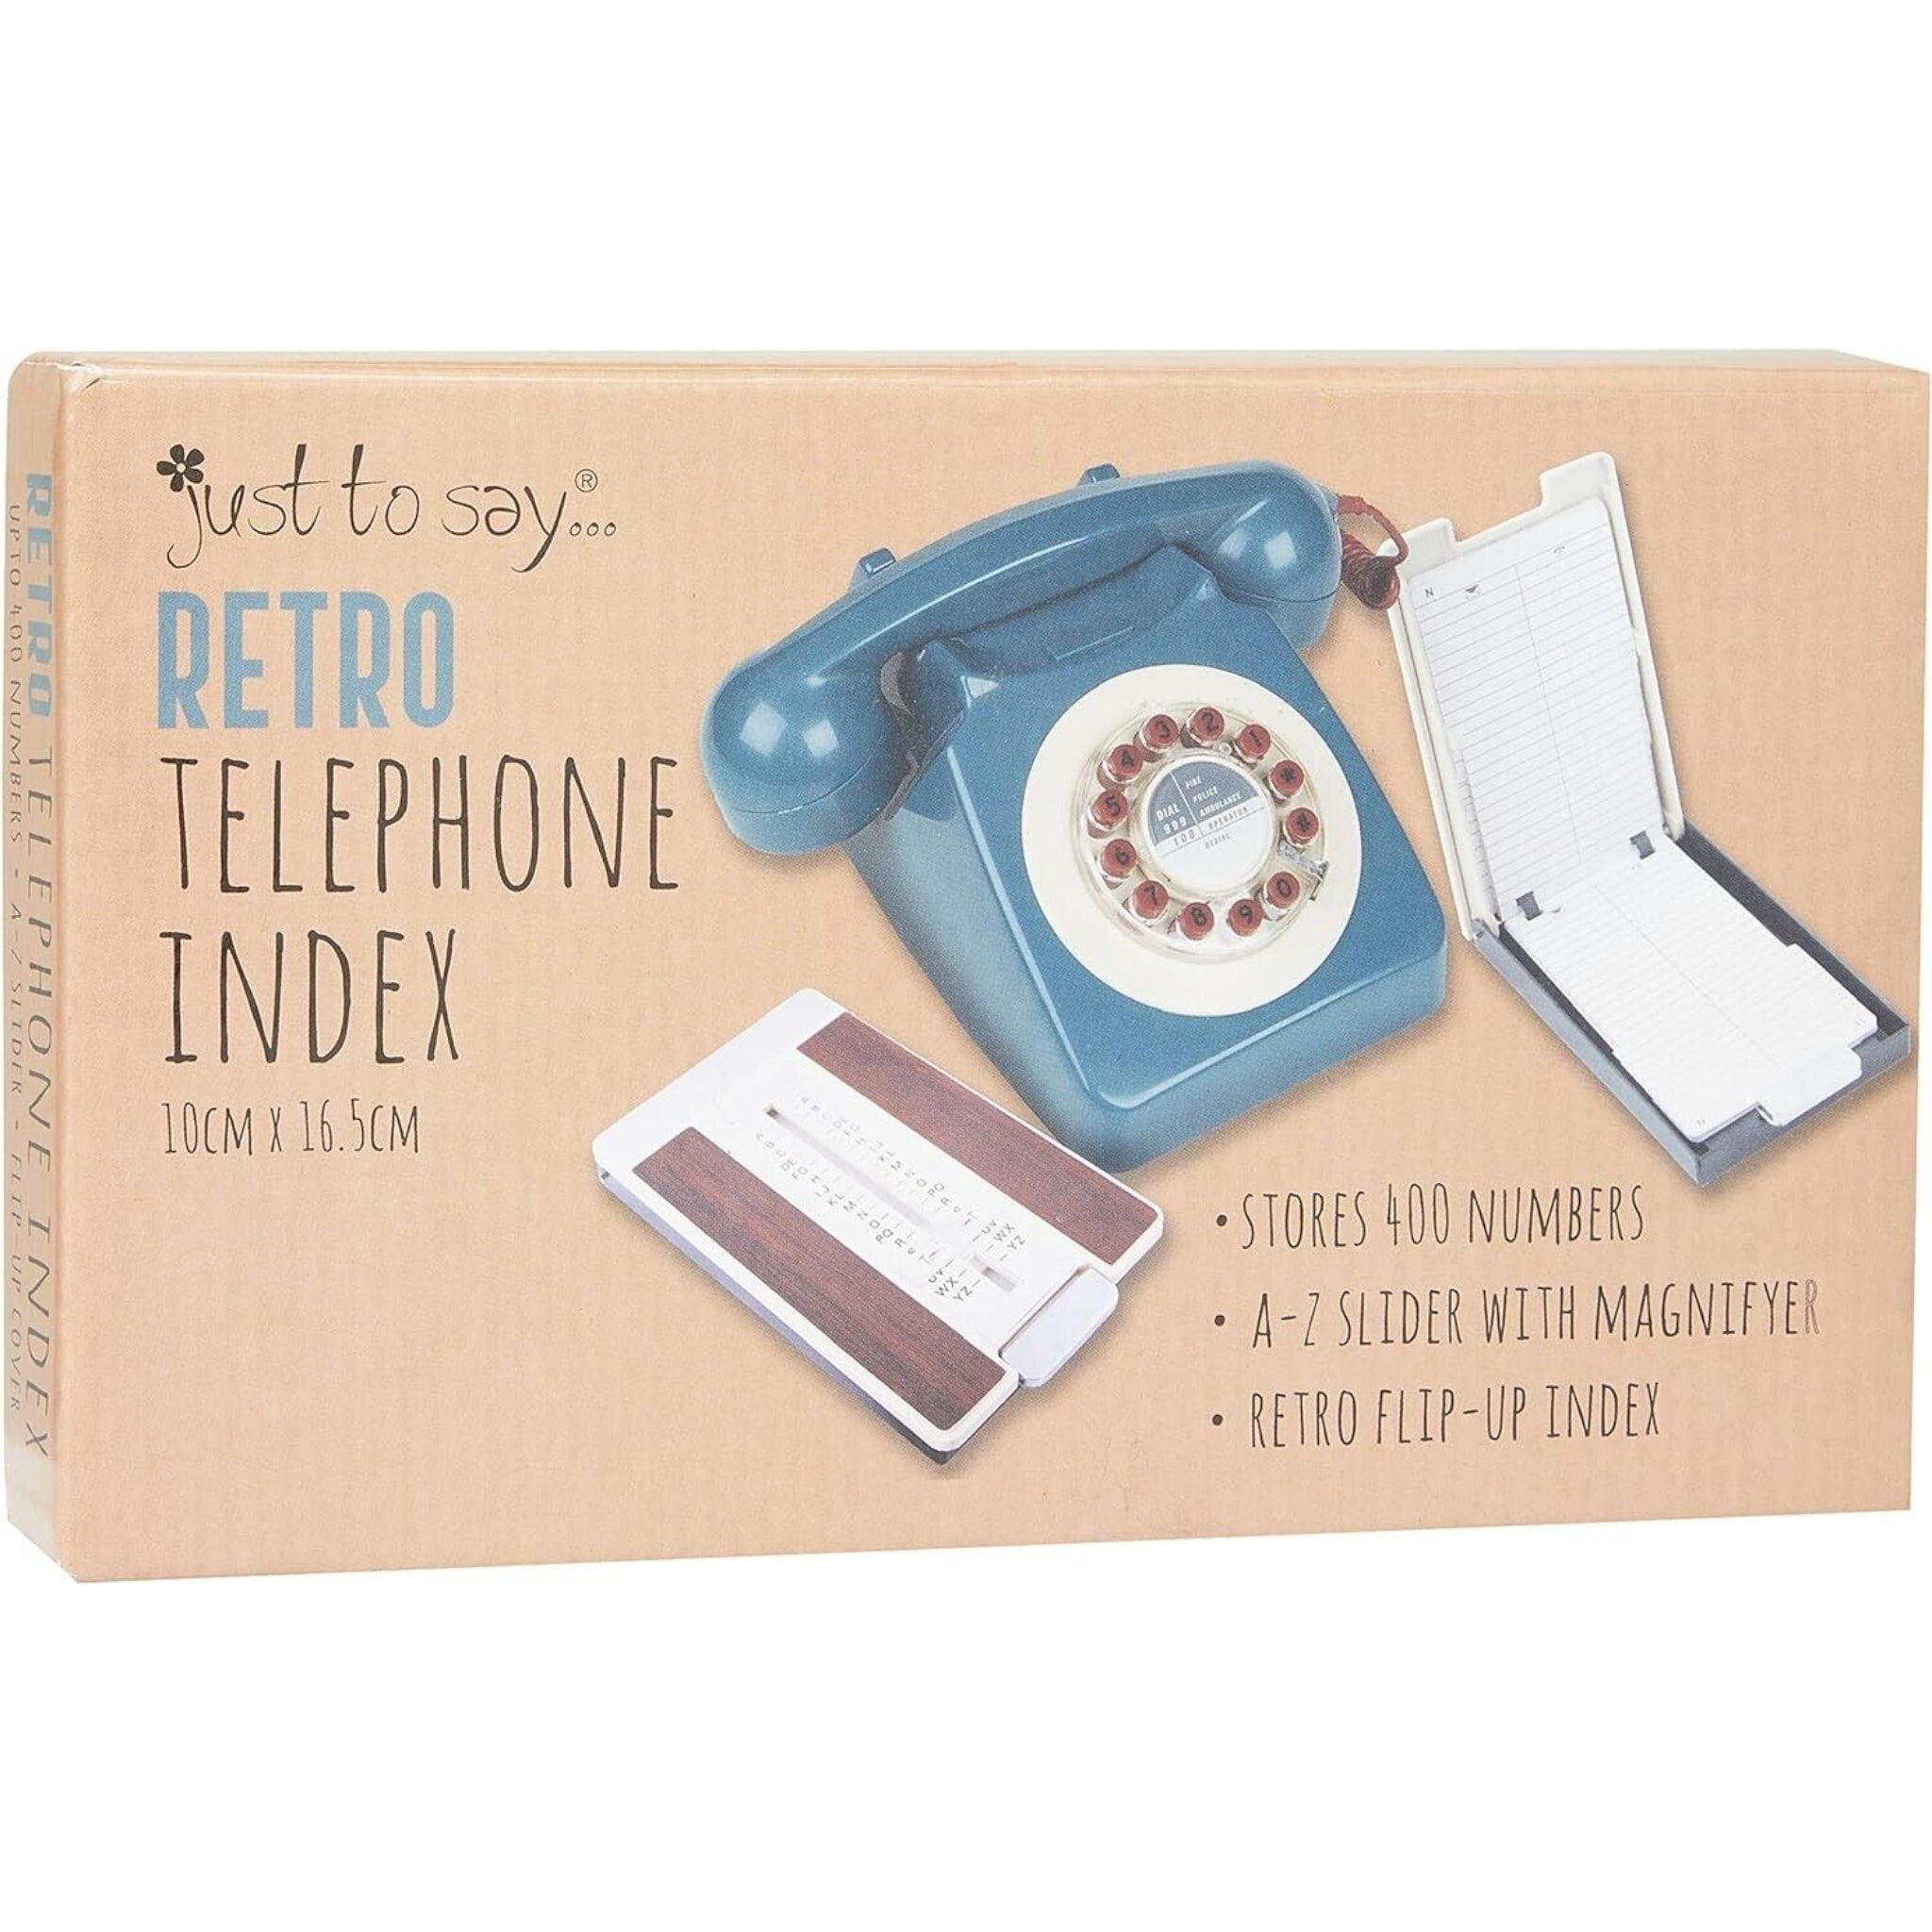 Beclen Harp A-Z Slider Flip Open Telephone Address Index Book Retro Store Up To 400 Numbers